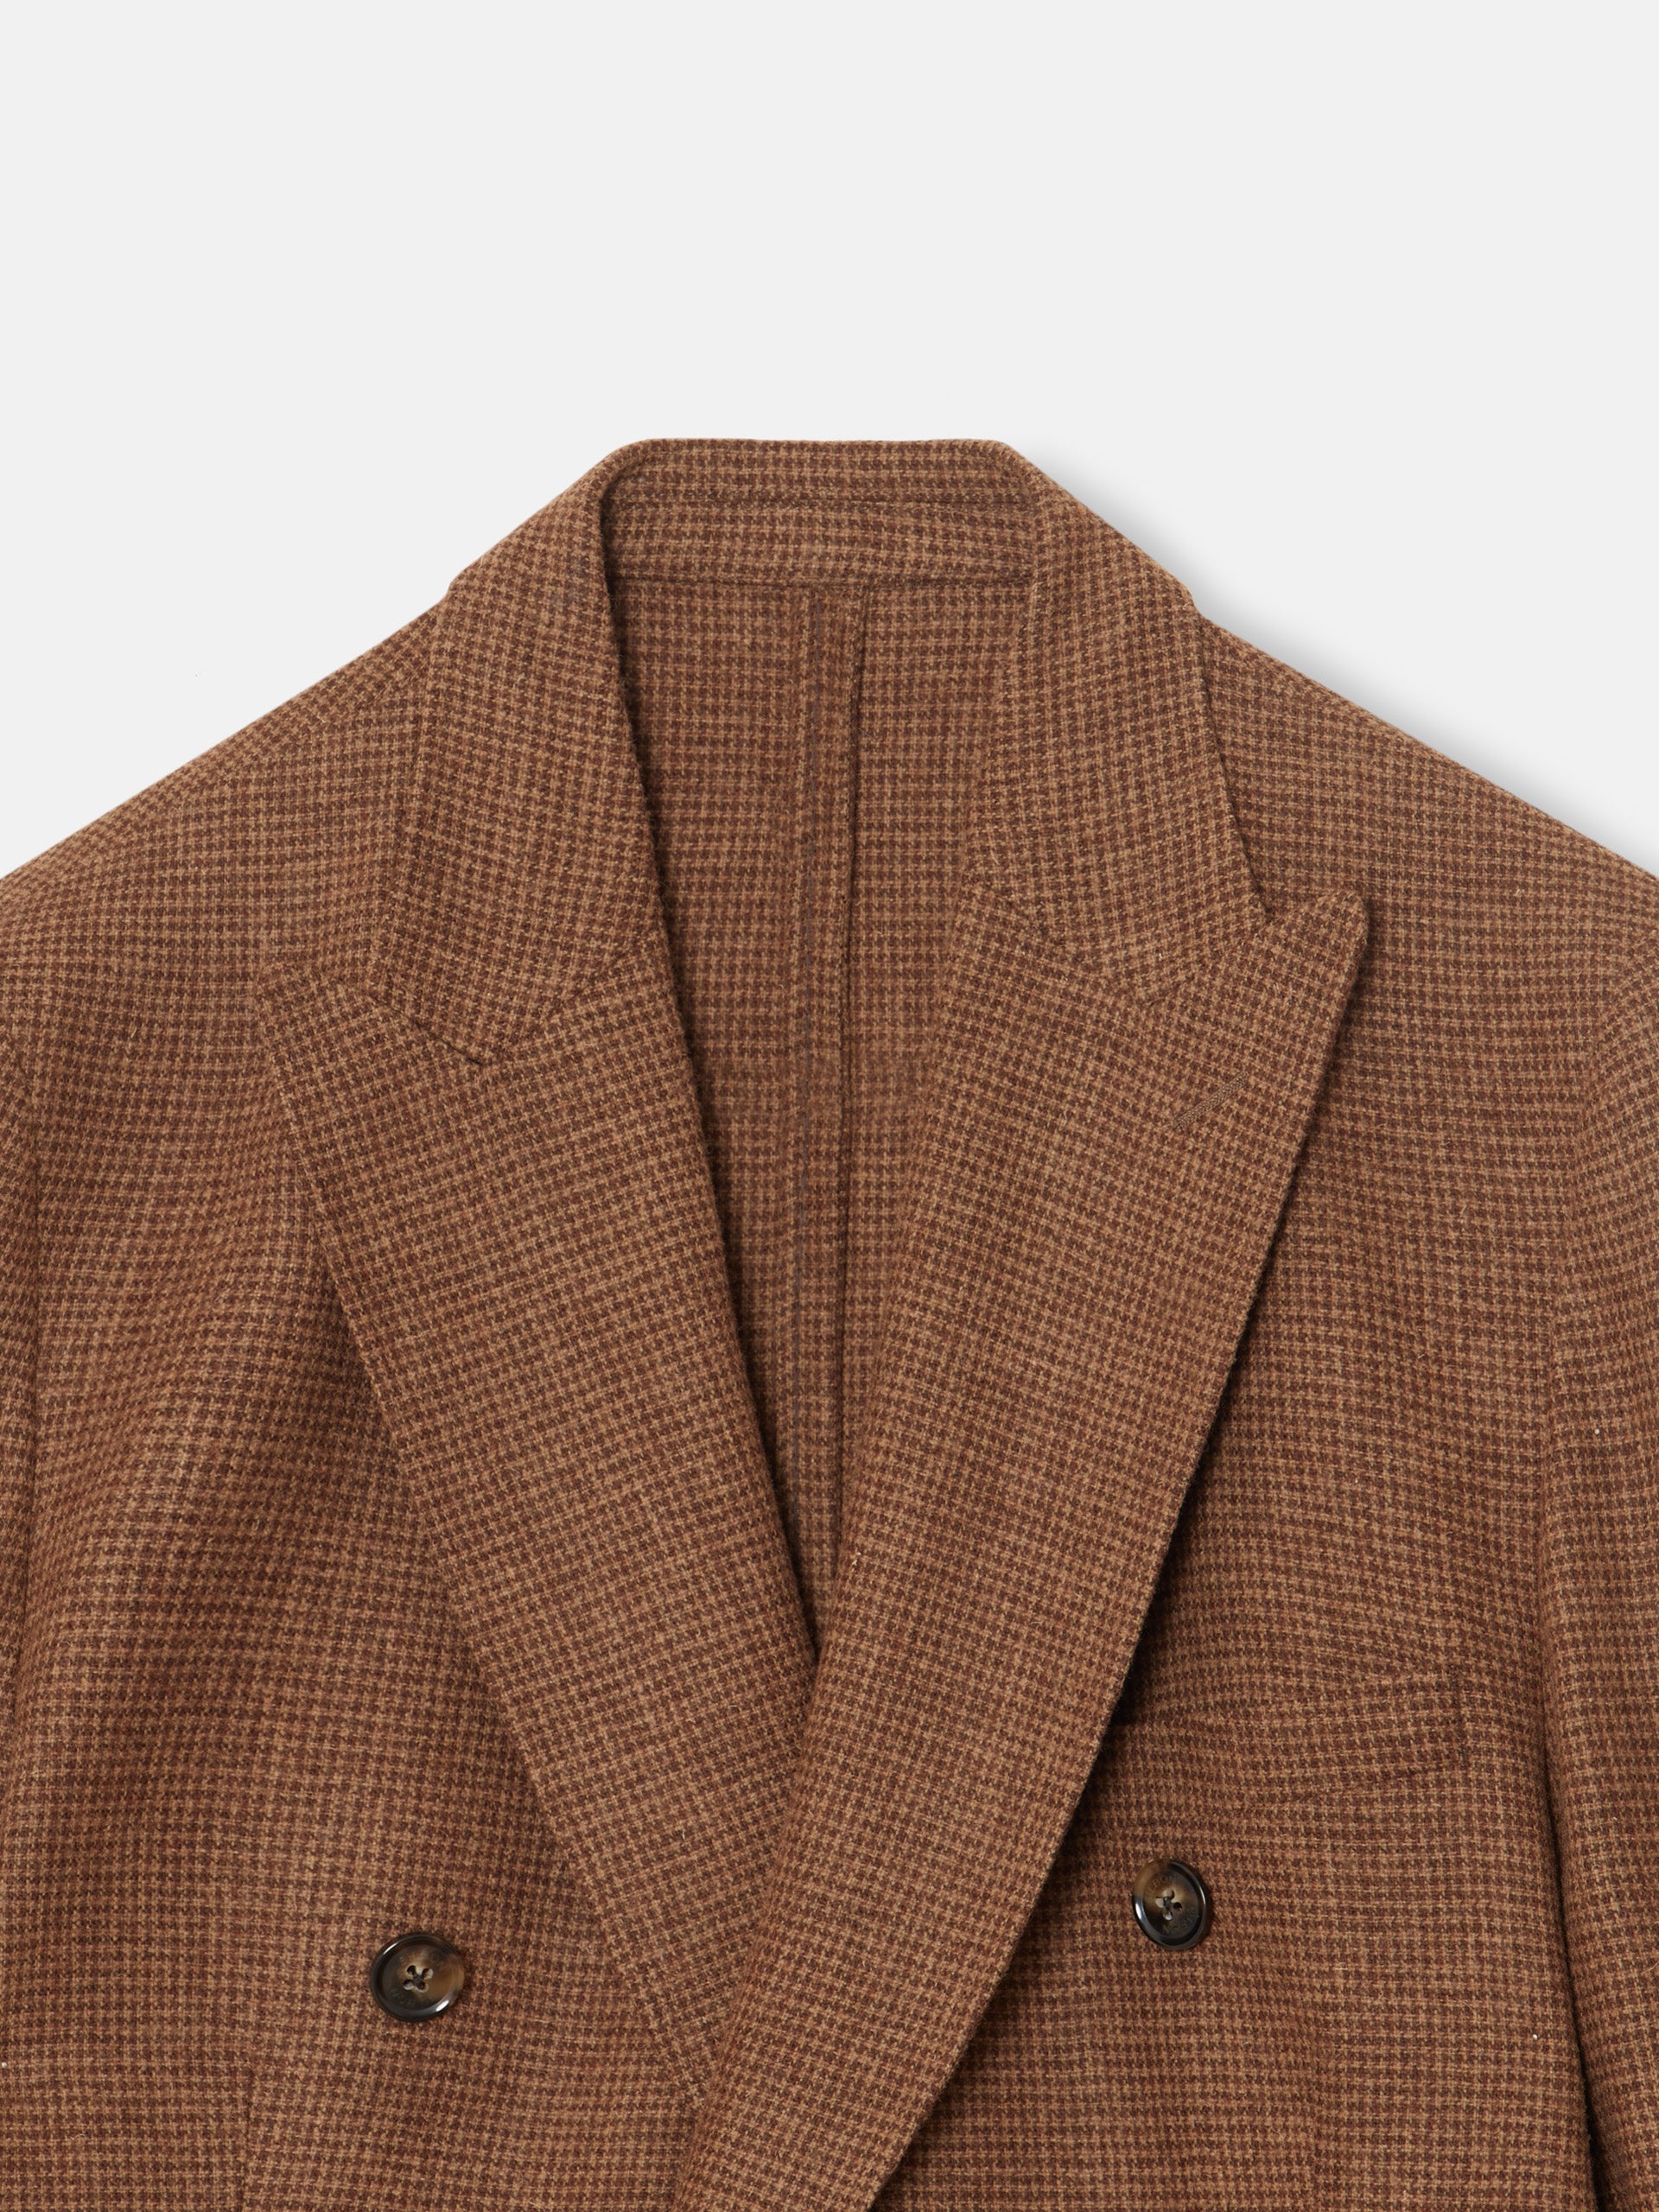 Silbon Unique Double-breasted Suit Jacket Beige Houndstooth